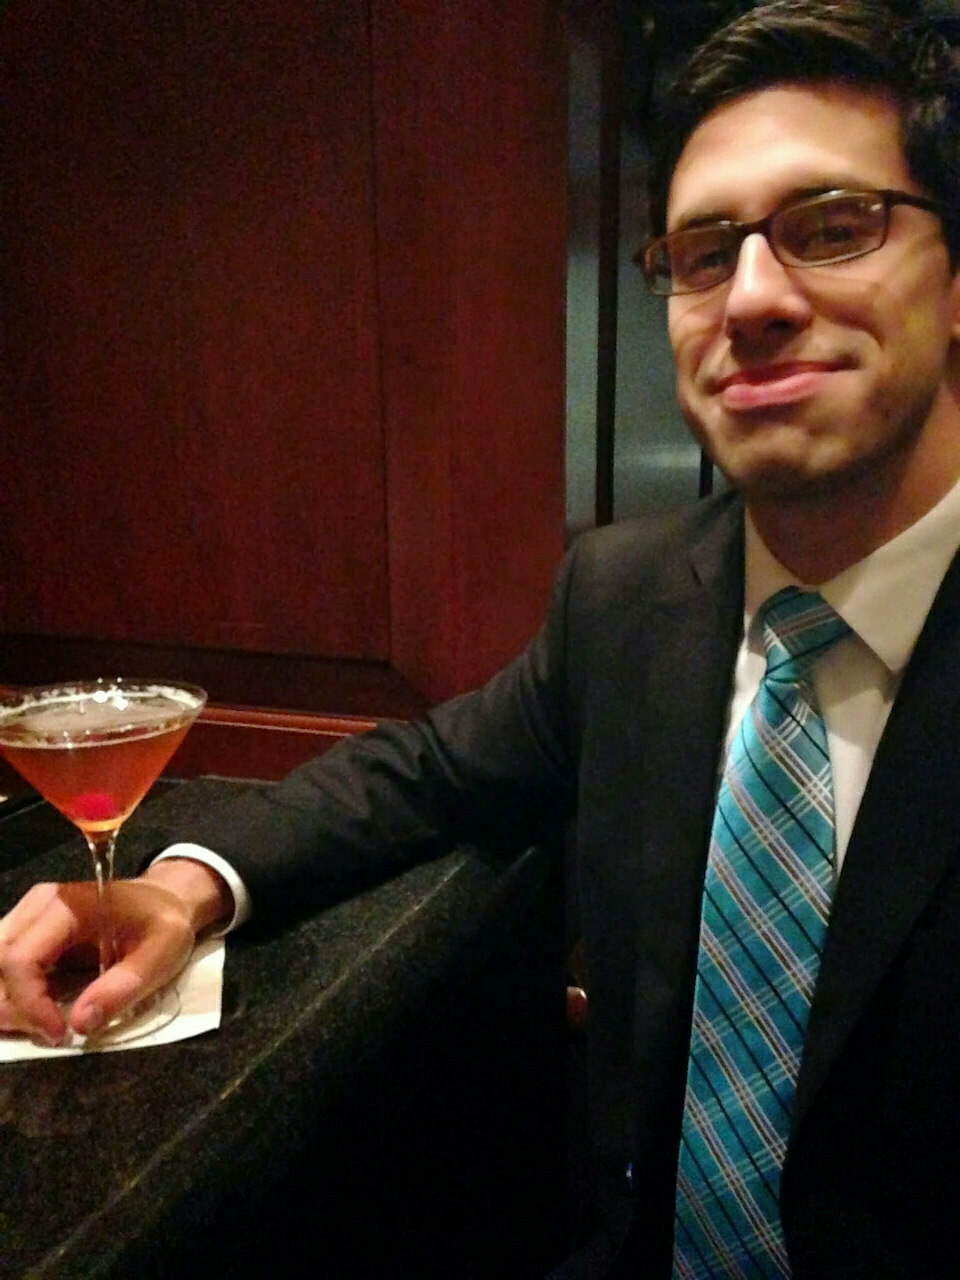 me sitting at my favorite hotel lounge, manhattan cocktail on the bar.